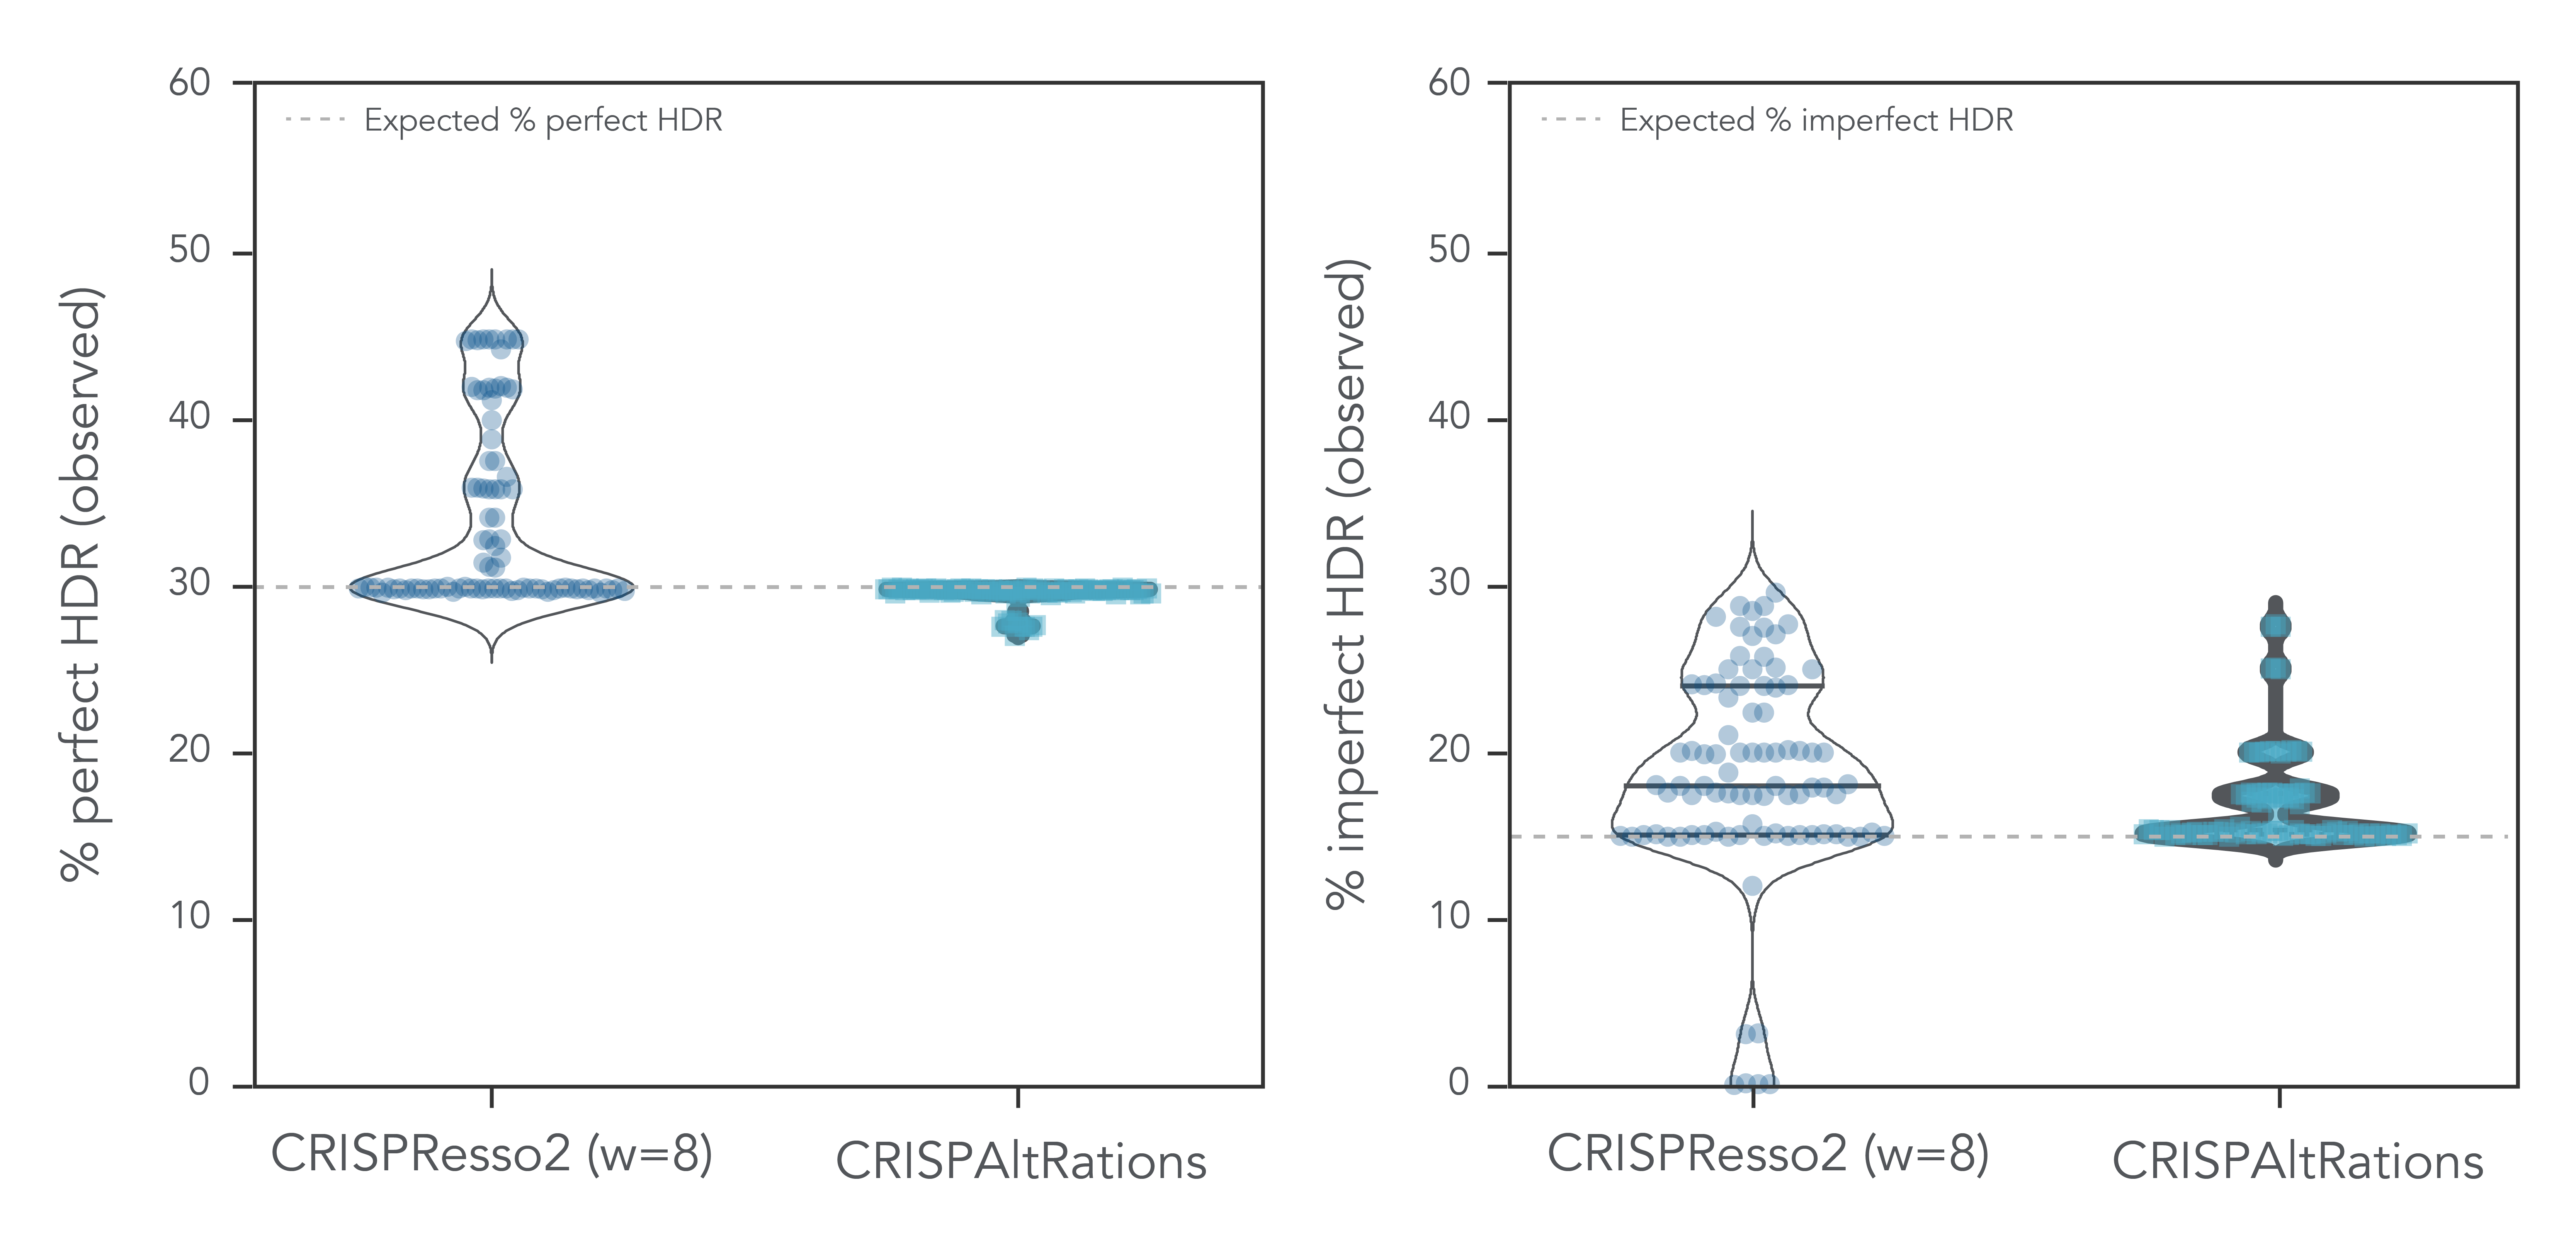 CRISPAltRations has a higher on-target rate of HDR annotation accuracy.